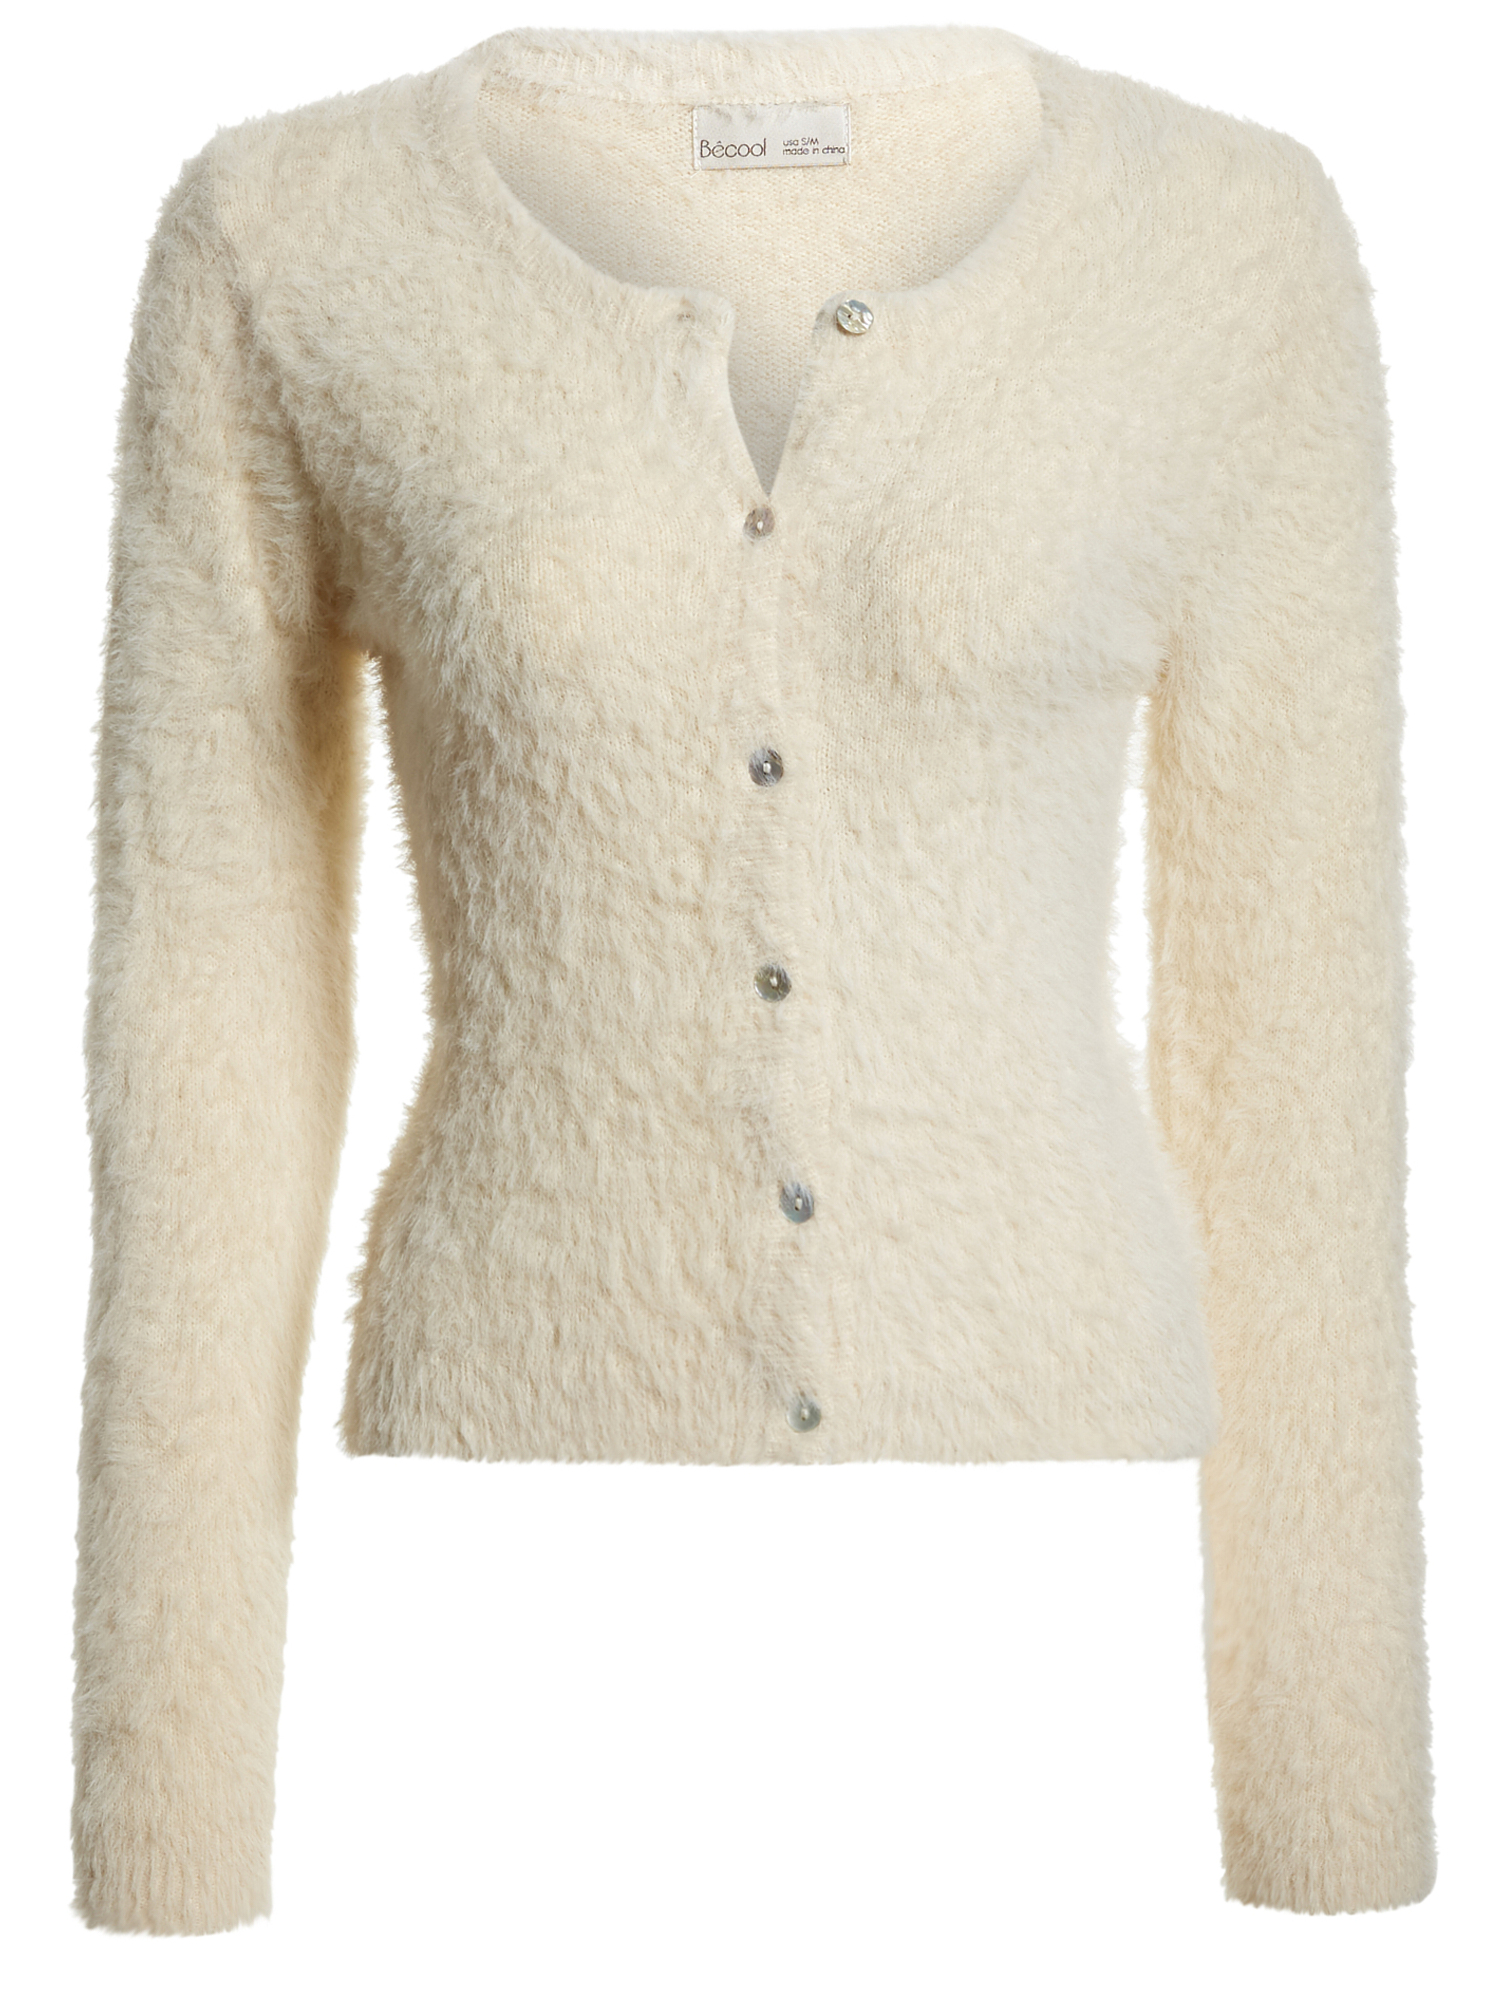 Fuzzy Button Front Cardigan